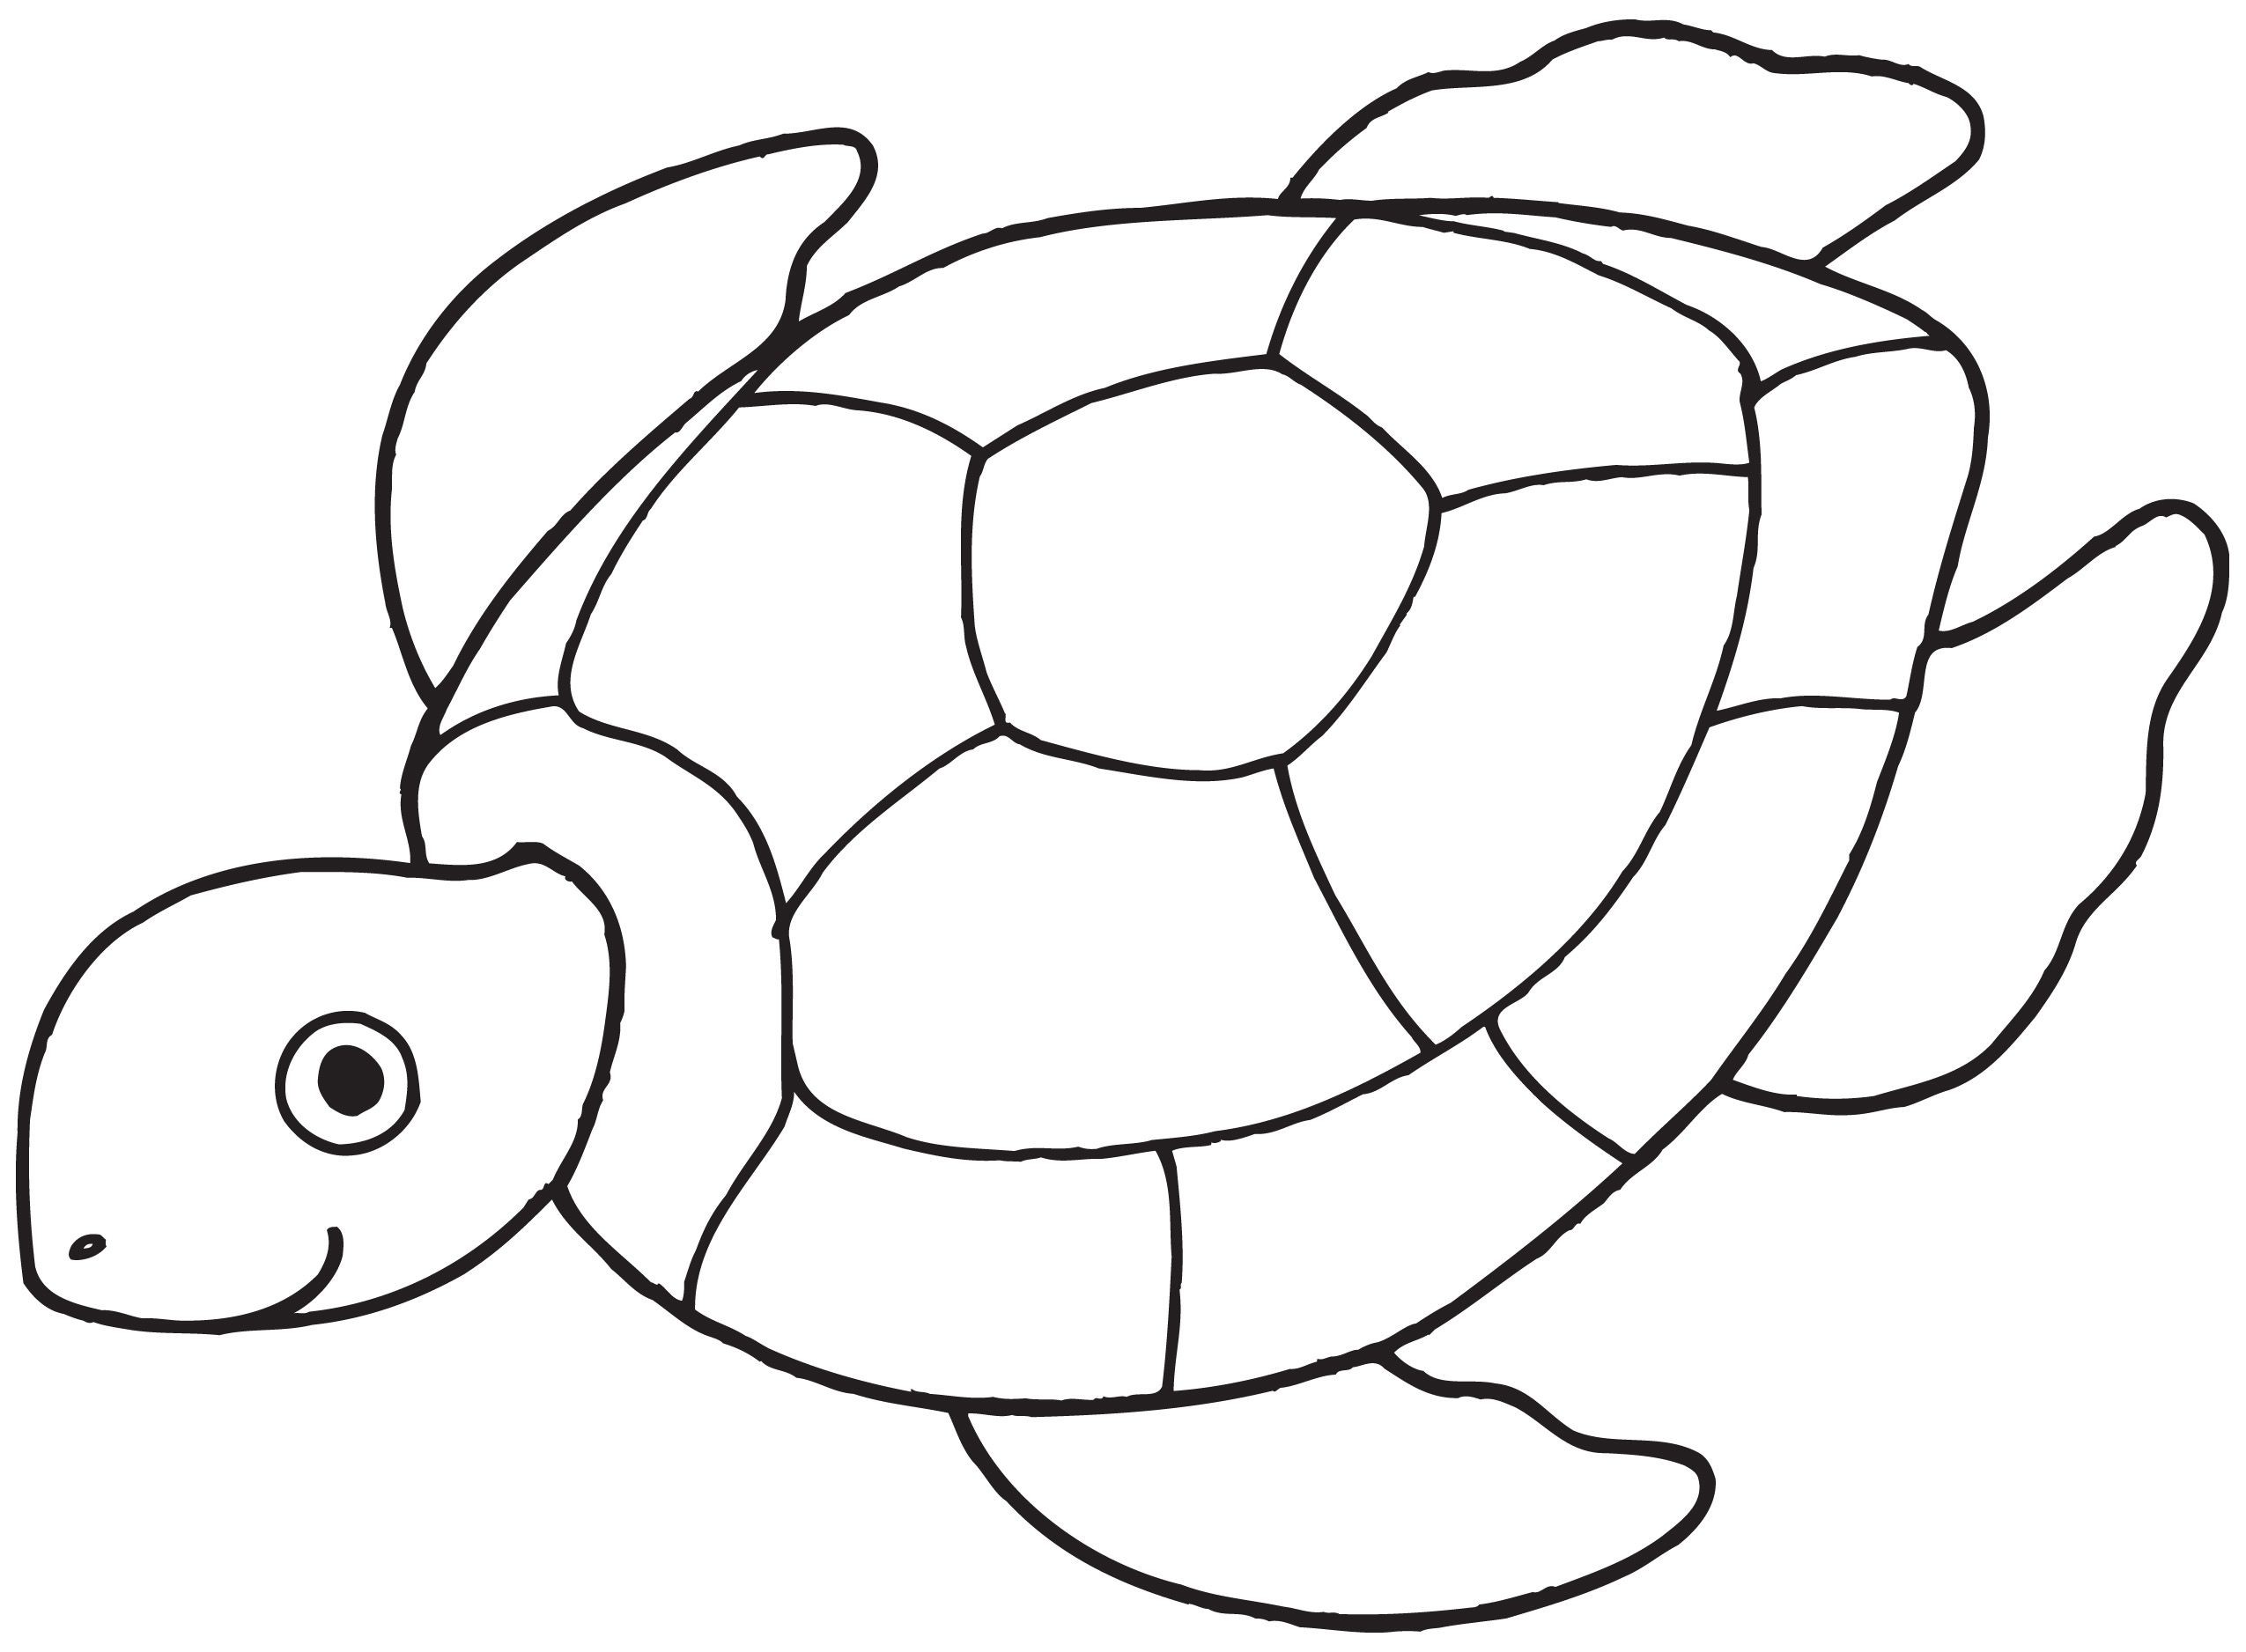 Shell Coloring Pages At Getcolorings.com | Free Printable Colorings